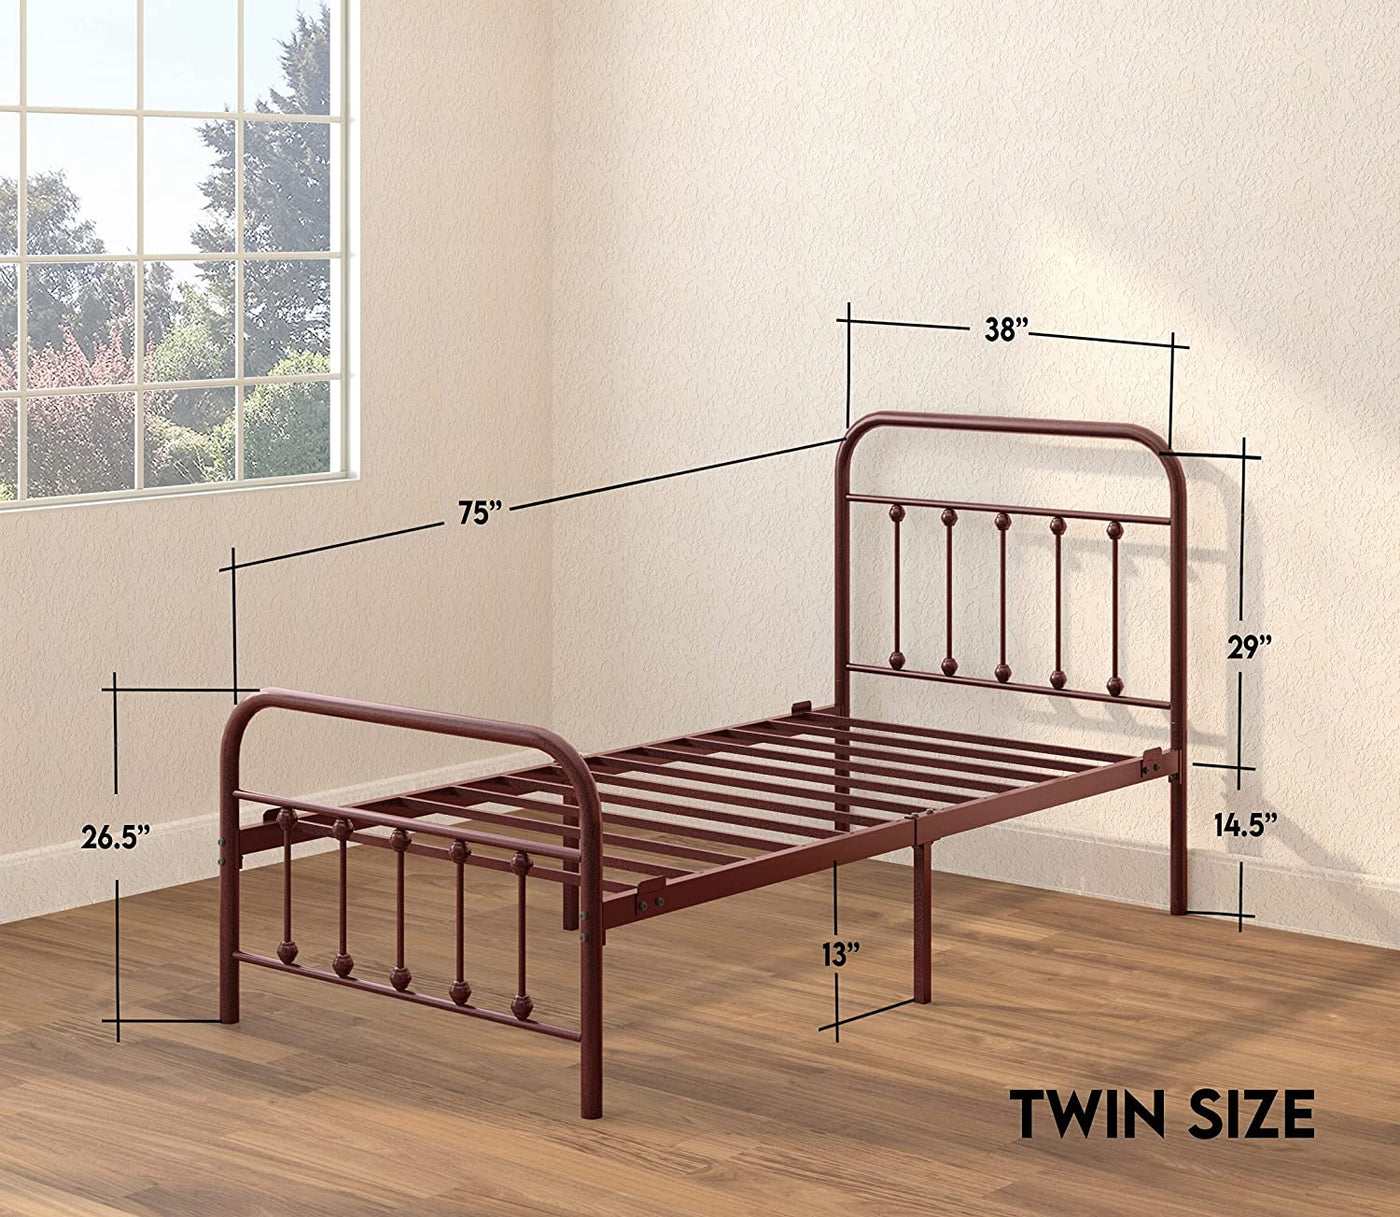 AMBEE21 CASTLEBEDS Vintage Twin Metal Bed Frame with Headboard and Footboard - $75